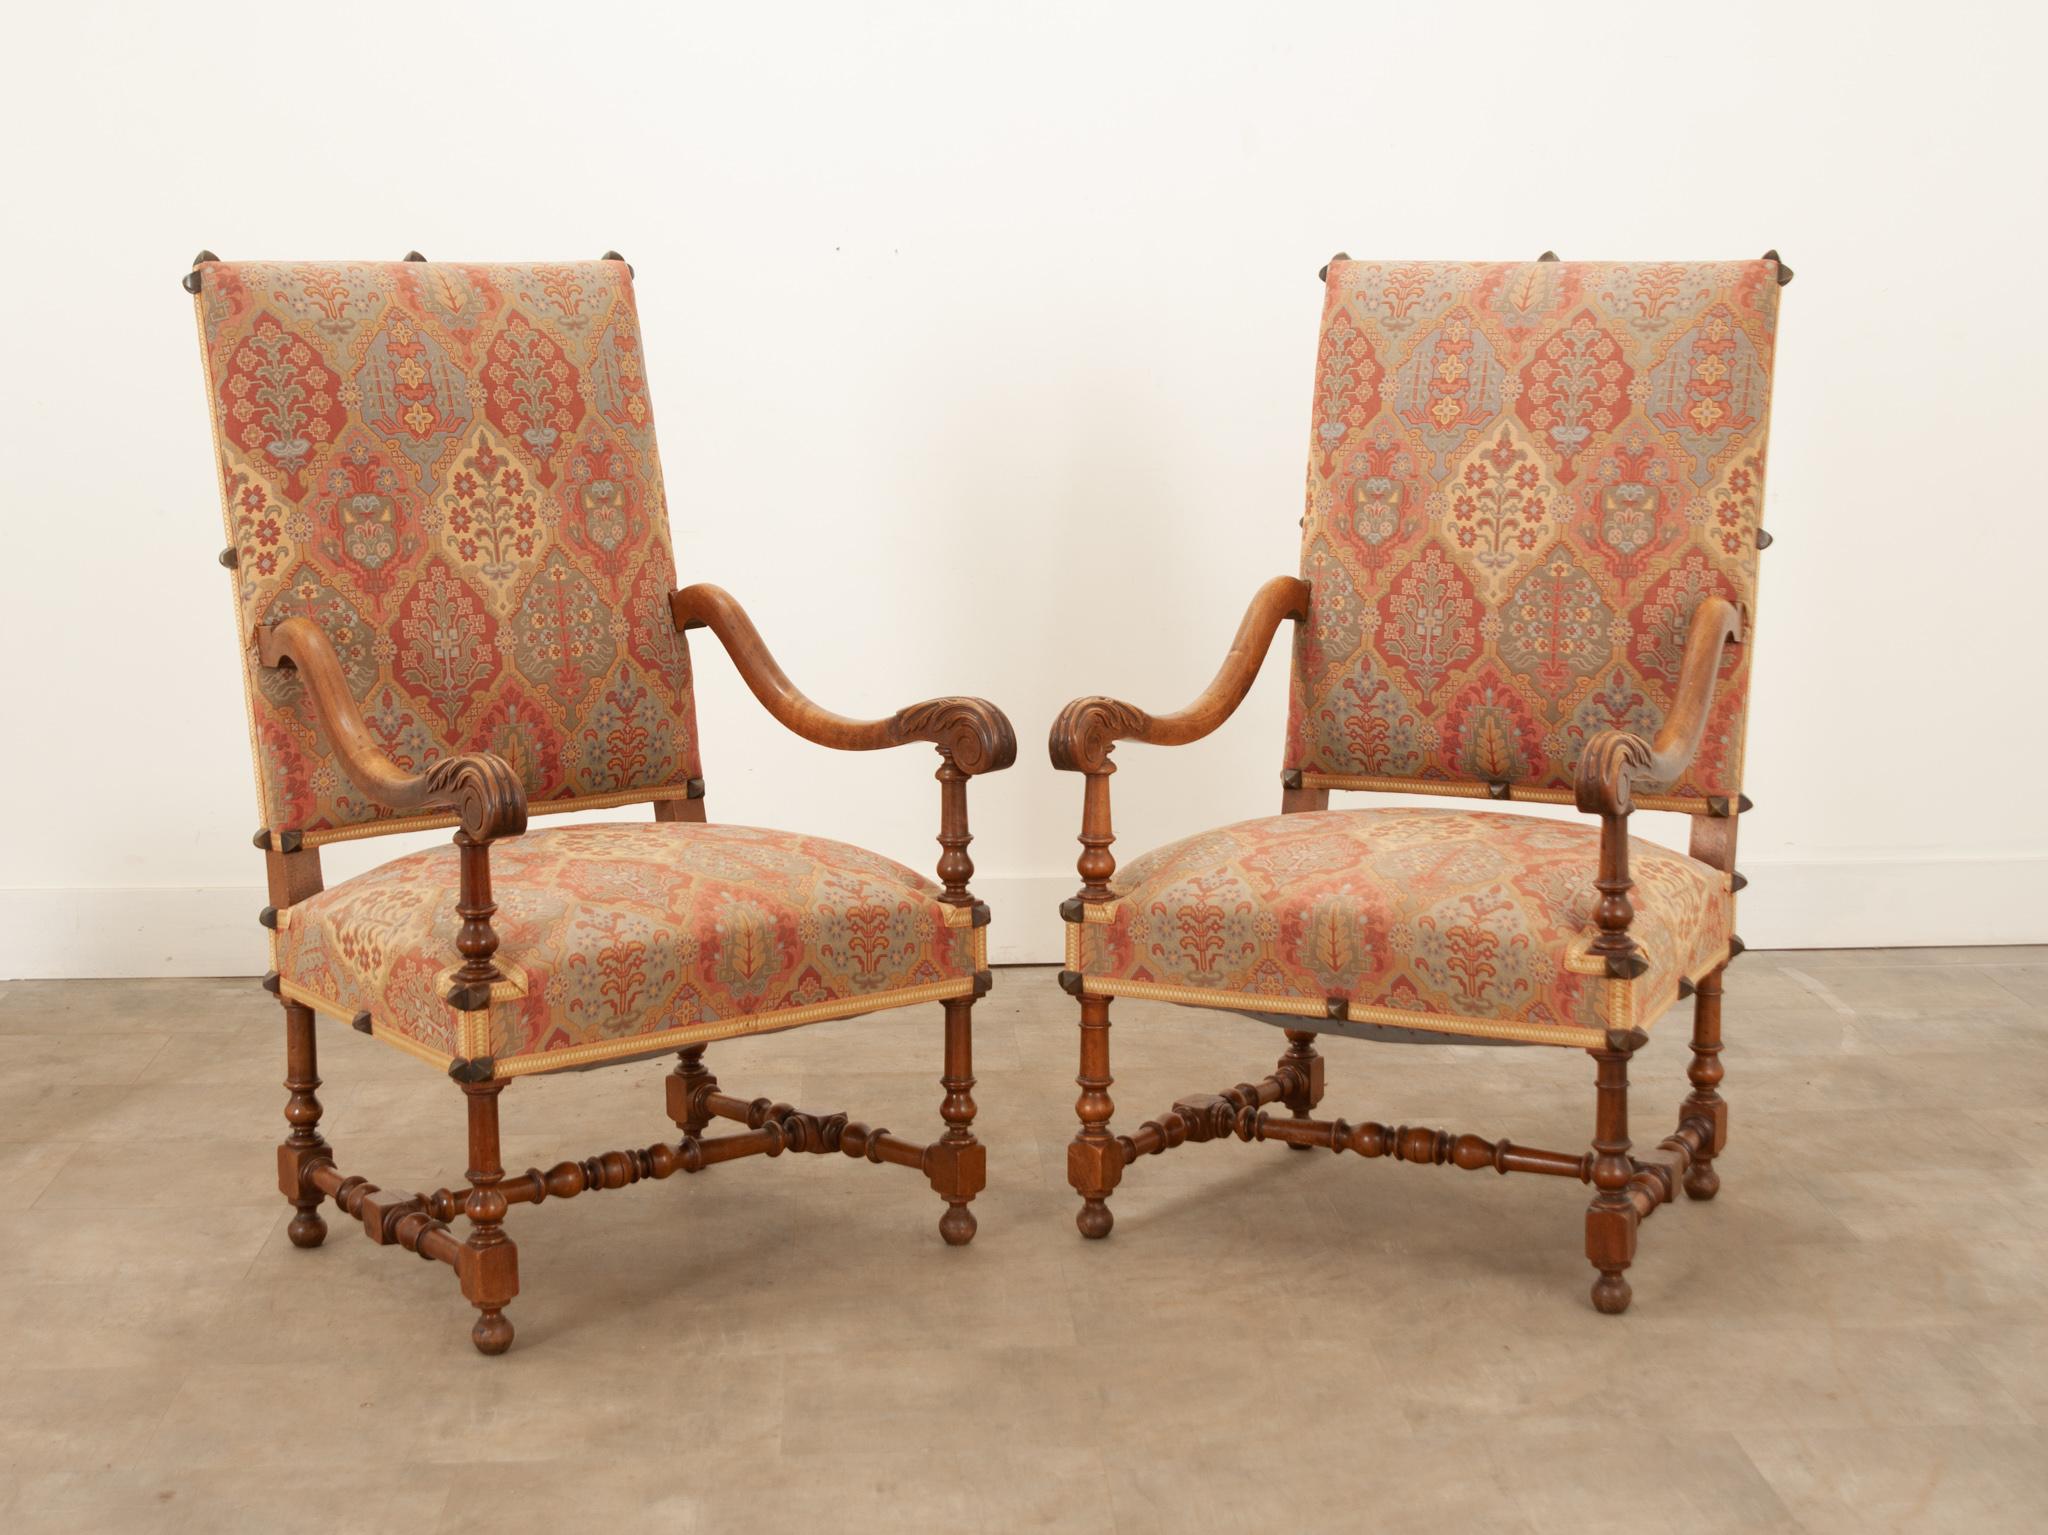 A wonderful pair of French 19th Century walnut Os de Mouton armchairs. These large armchairs are upholstered in a printed tapestry fabric, trimmed in tape and affixed with oversized brass nailheads. The curved Os de Mouton “mutton bone” arms not